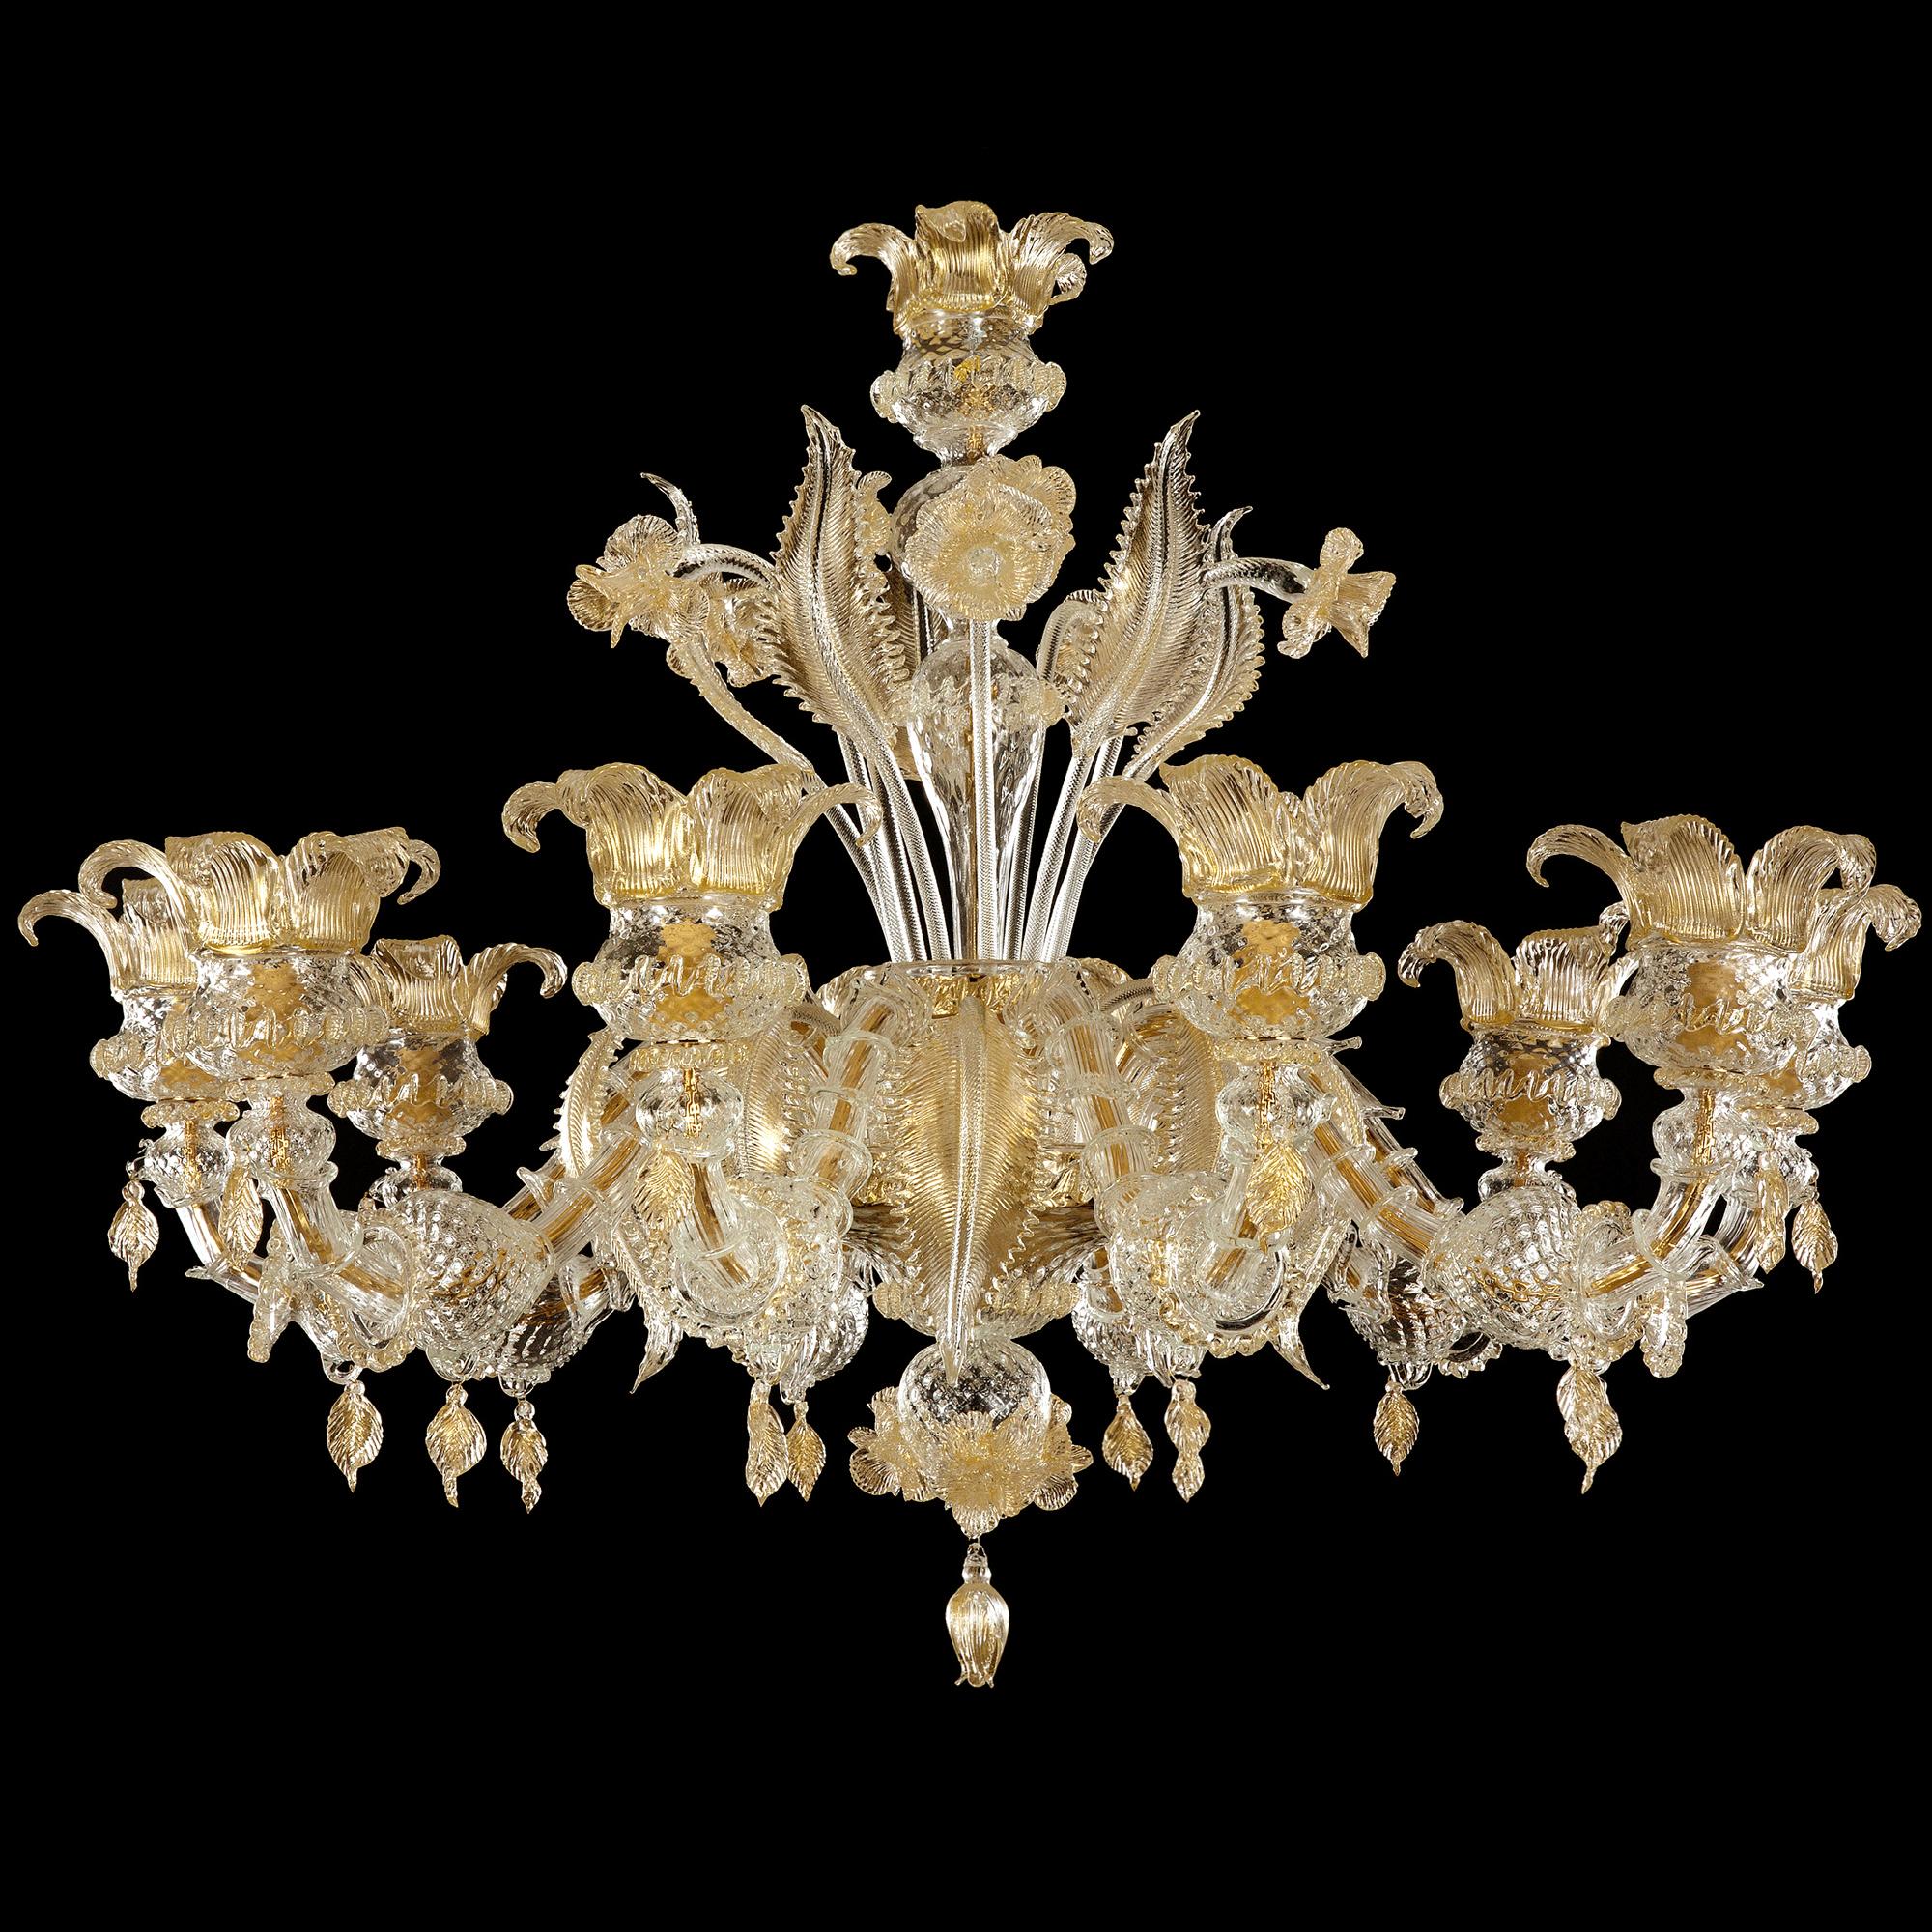 The Murano glass chandelier Regale is a romantic lighting work, inspired from the luxurious halls of the venetian buildings on the Canal Grande.
The colors, the floral decorations, the Rezzonico arms, the pendant elements… all the characteristics of